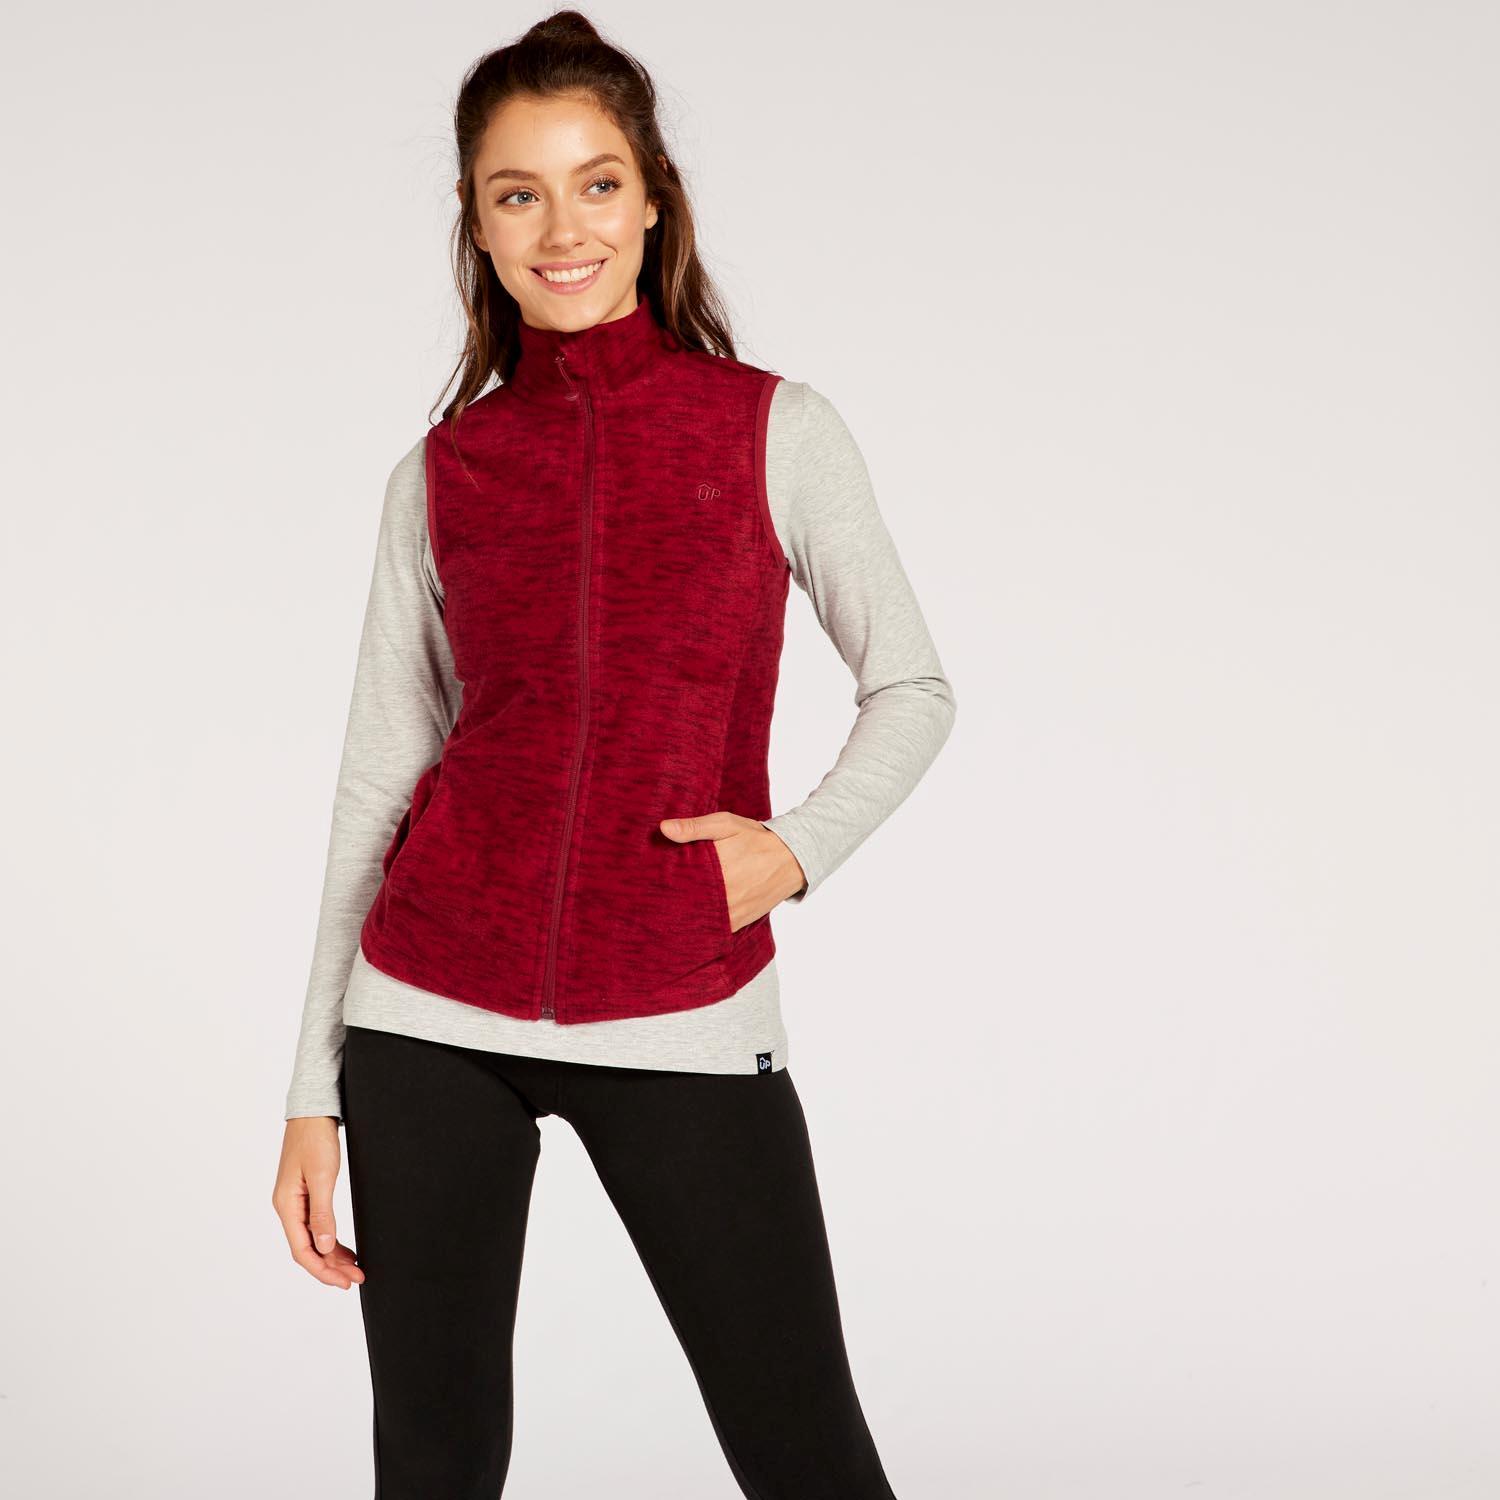 Up Basic-Rouge-Gilet polaire femme sports taille S